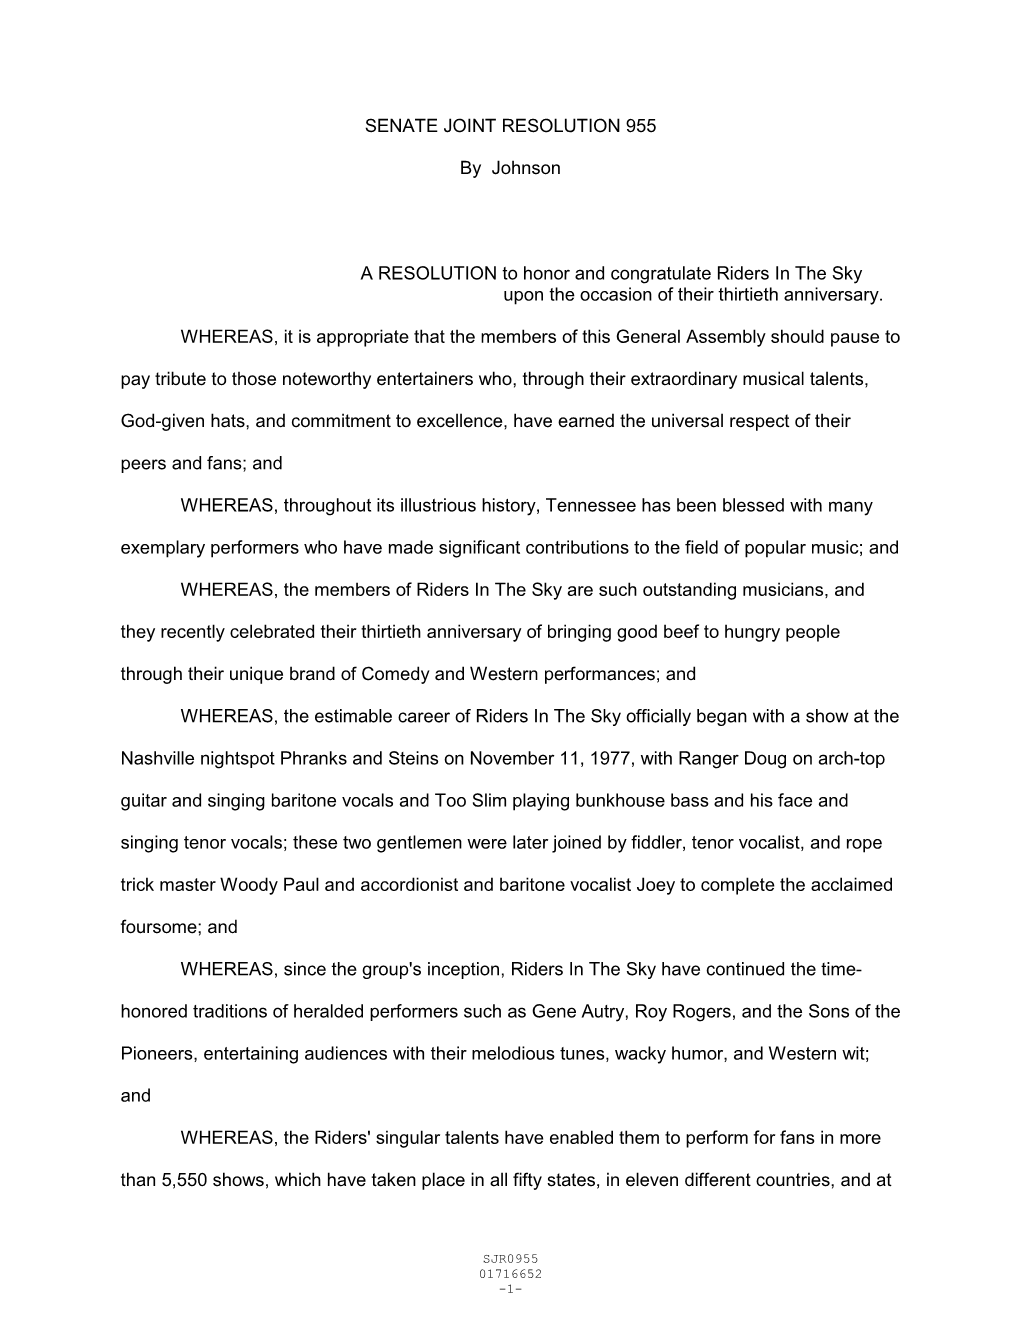 SENATE JOINT RESOLUTION 955 by Johnson a RESOLUTION To